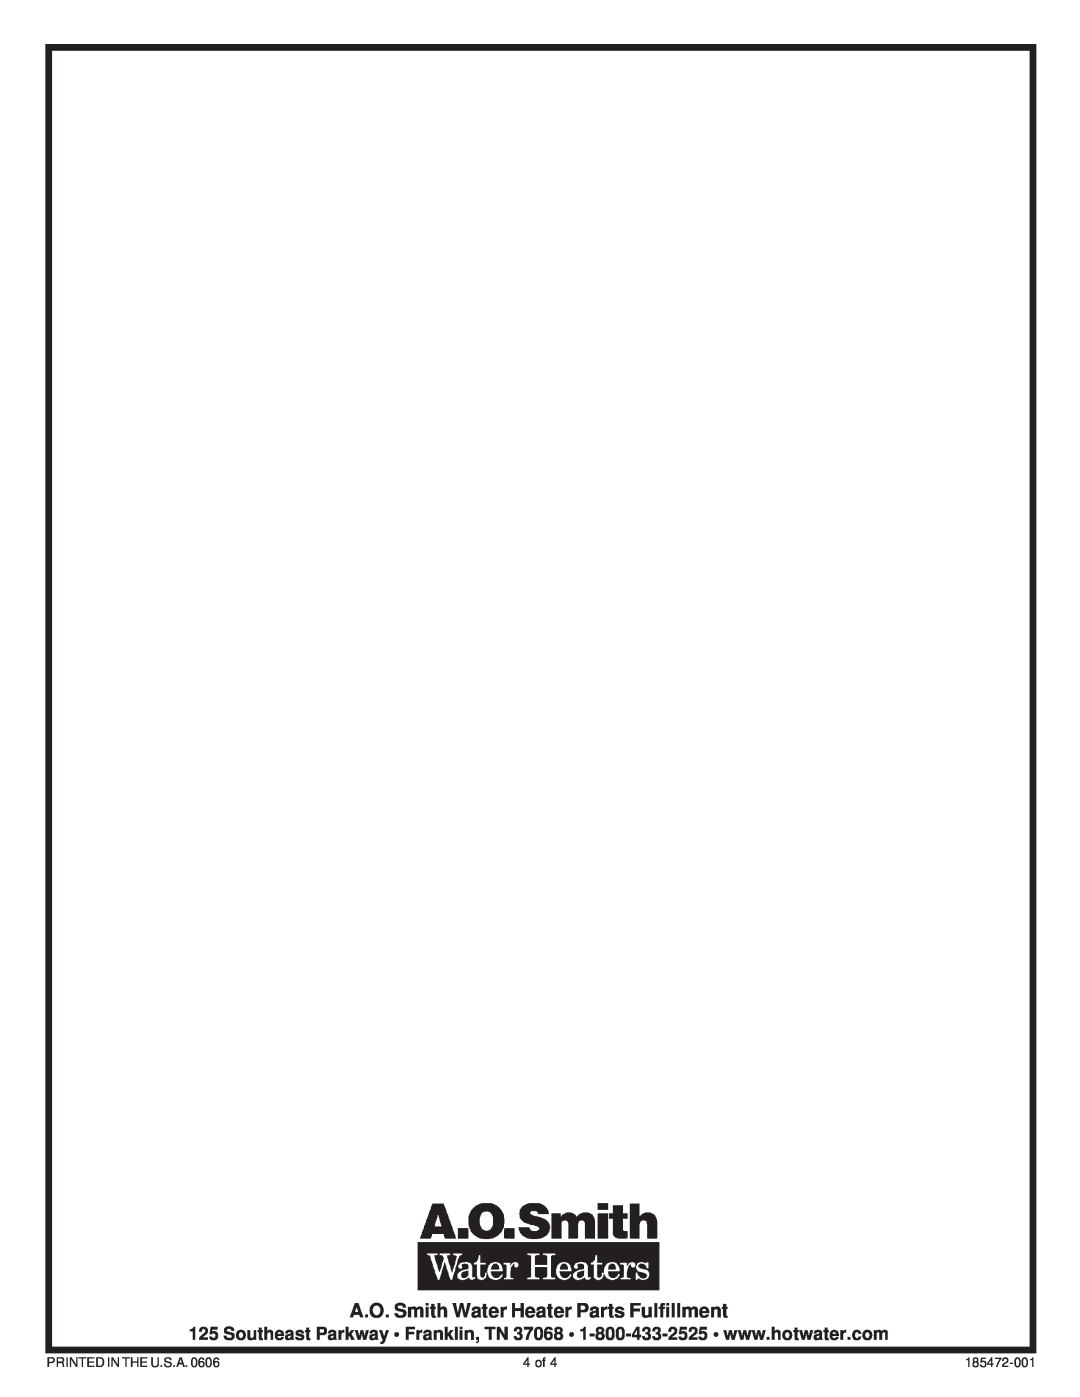 A.O. Smith GPVR 40, GPVH 40 manual A.O. Smith Water Heater Parts Fulfillment, Printed In The U.S.A, 4 of, 185472-001 